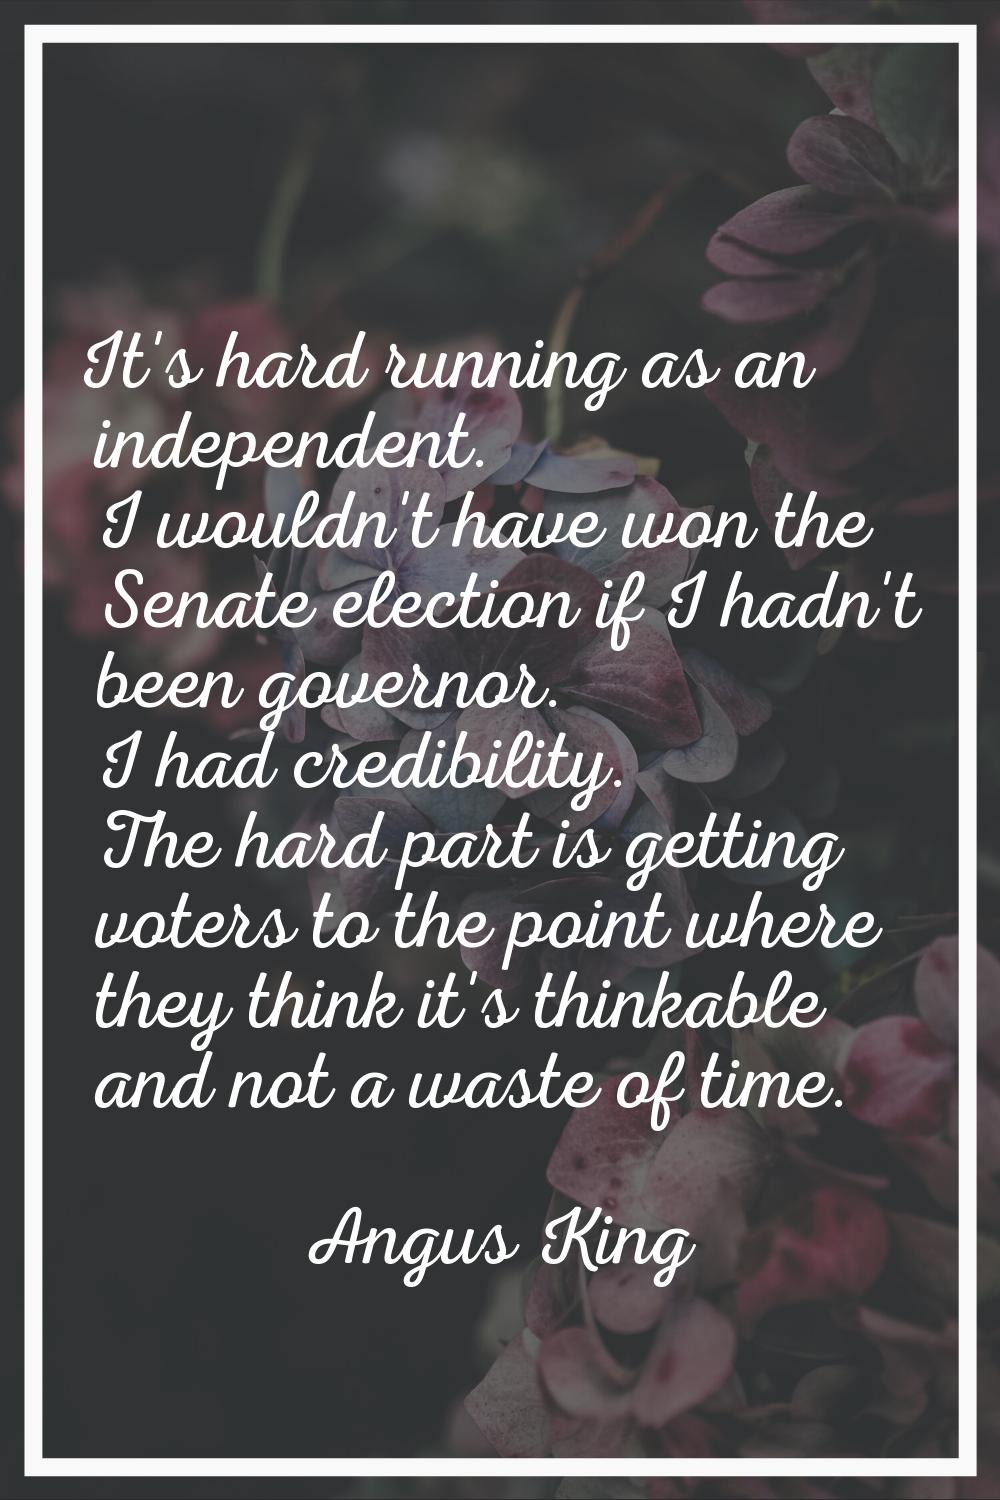 It's hard running as an independent. I wouldn't have won the Senate election if I hadn't been gover